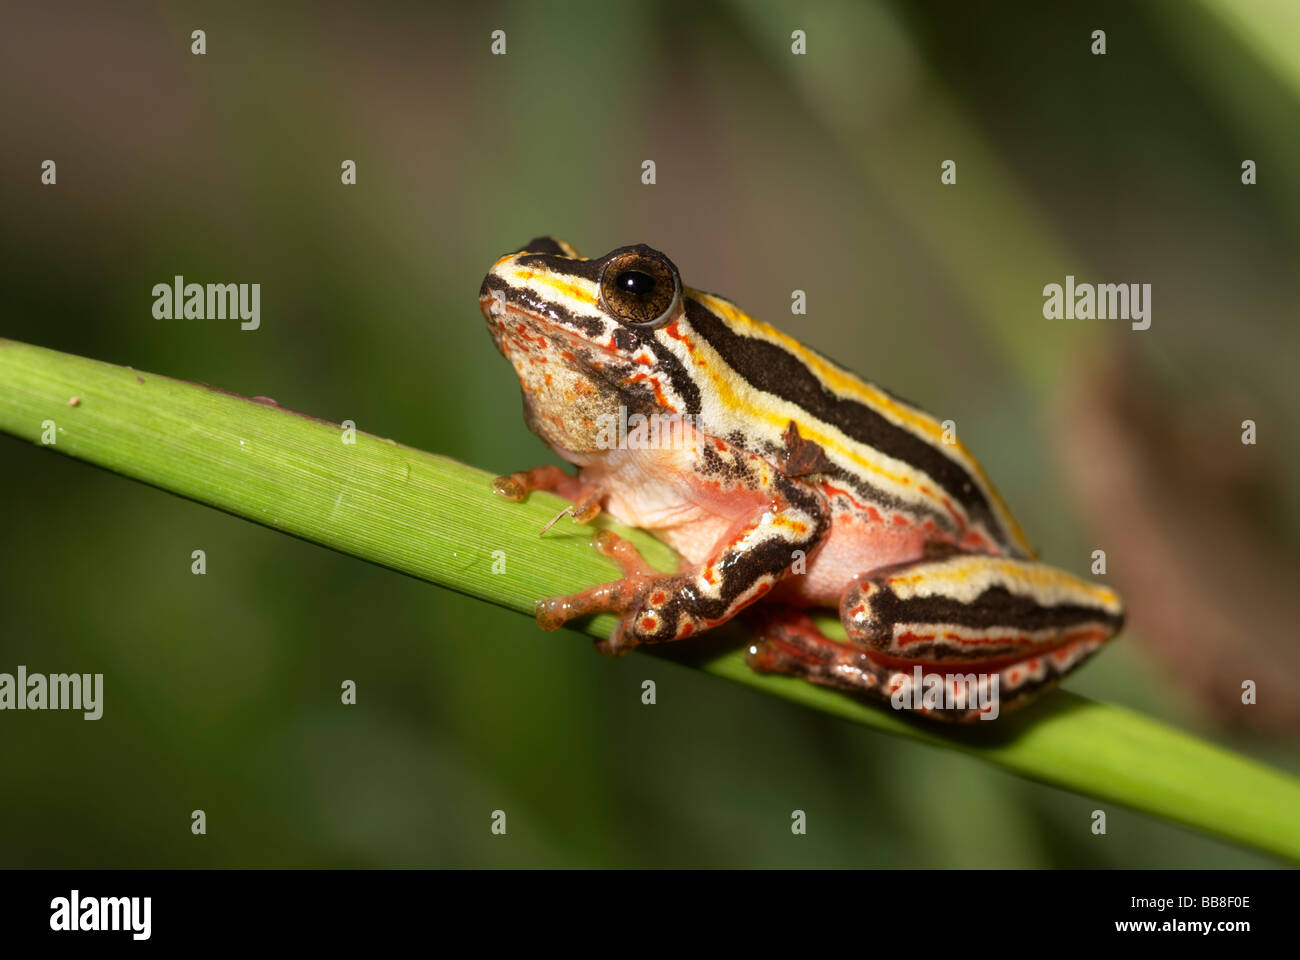 Yellow Painted Reed Frog (Hyperolius marmoratus) perched on a reed. Pongola, Kwazulu Natal Province, South Africa Stock Photo